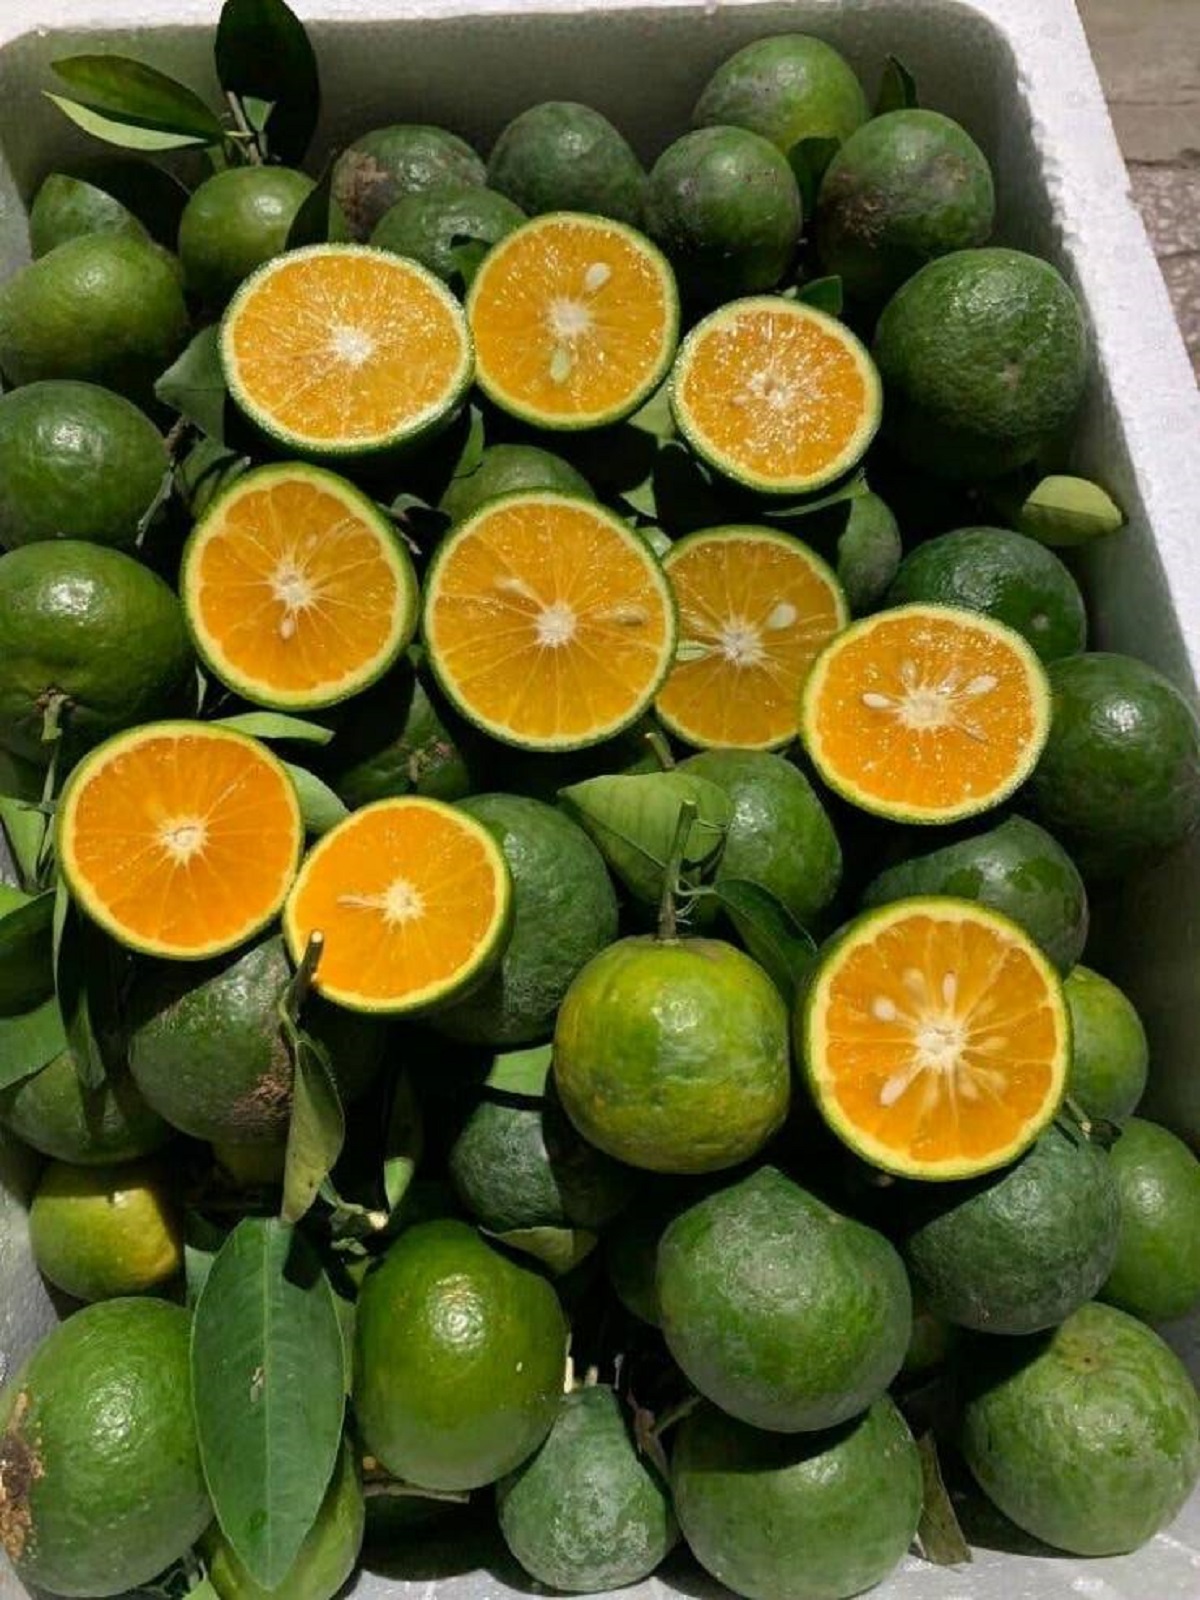 Oranges can have green skin in certain climates. Yet, for some reason, they are not called "greens":